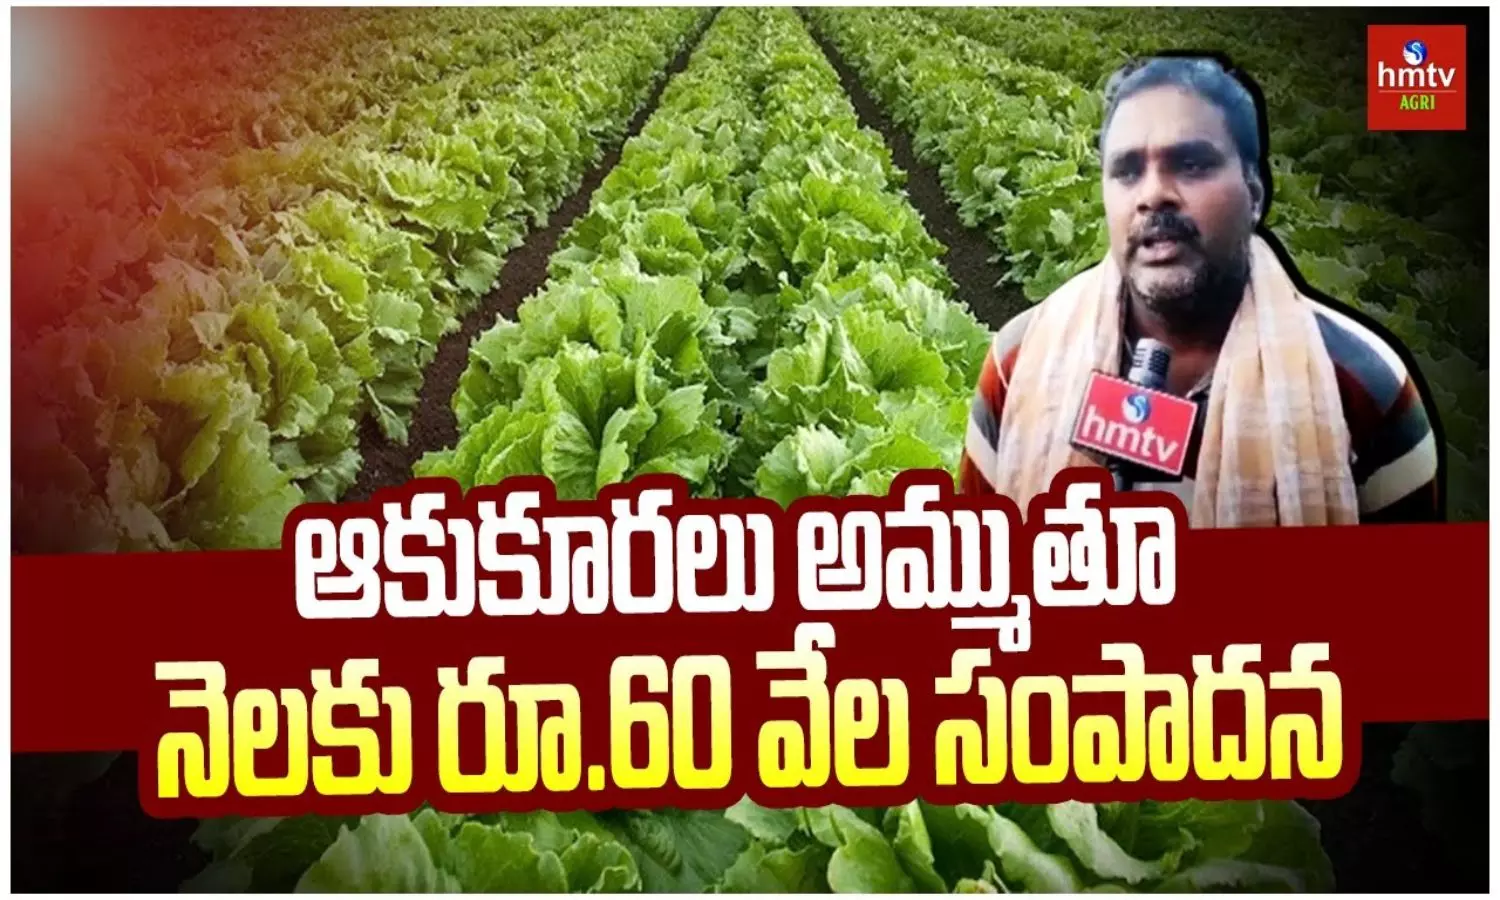 Man Earns Rs. 60,000 Selling Leafy Vegetables